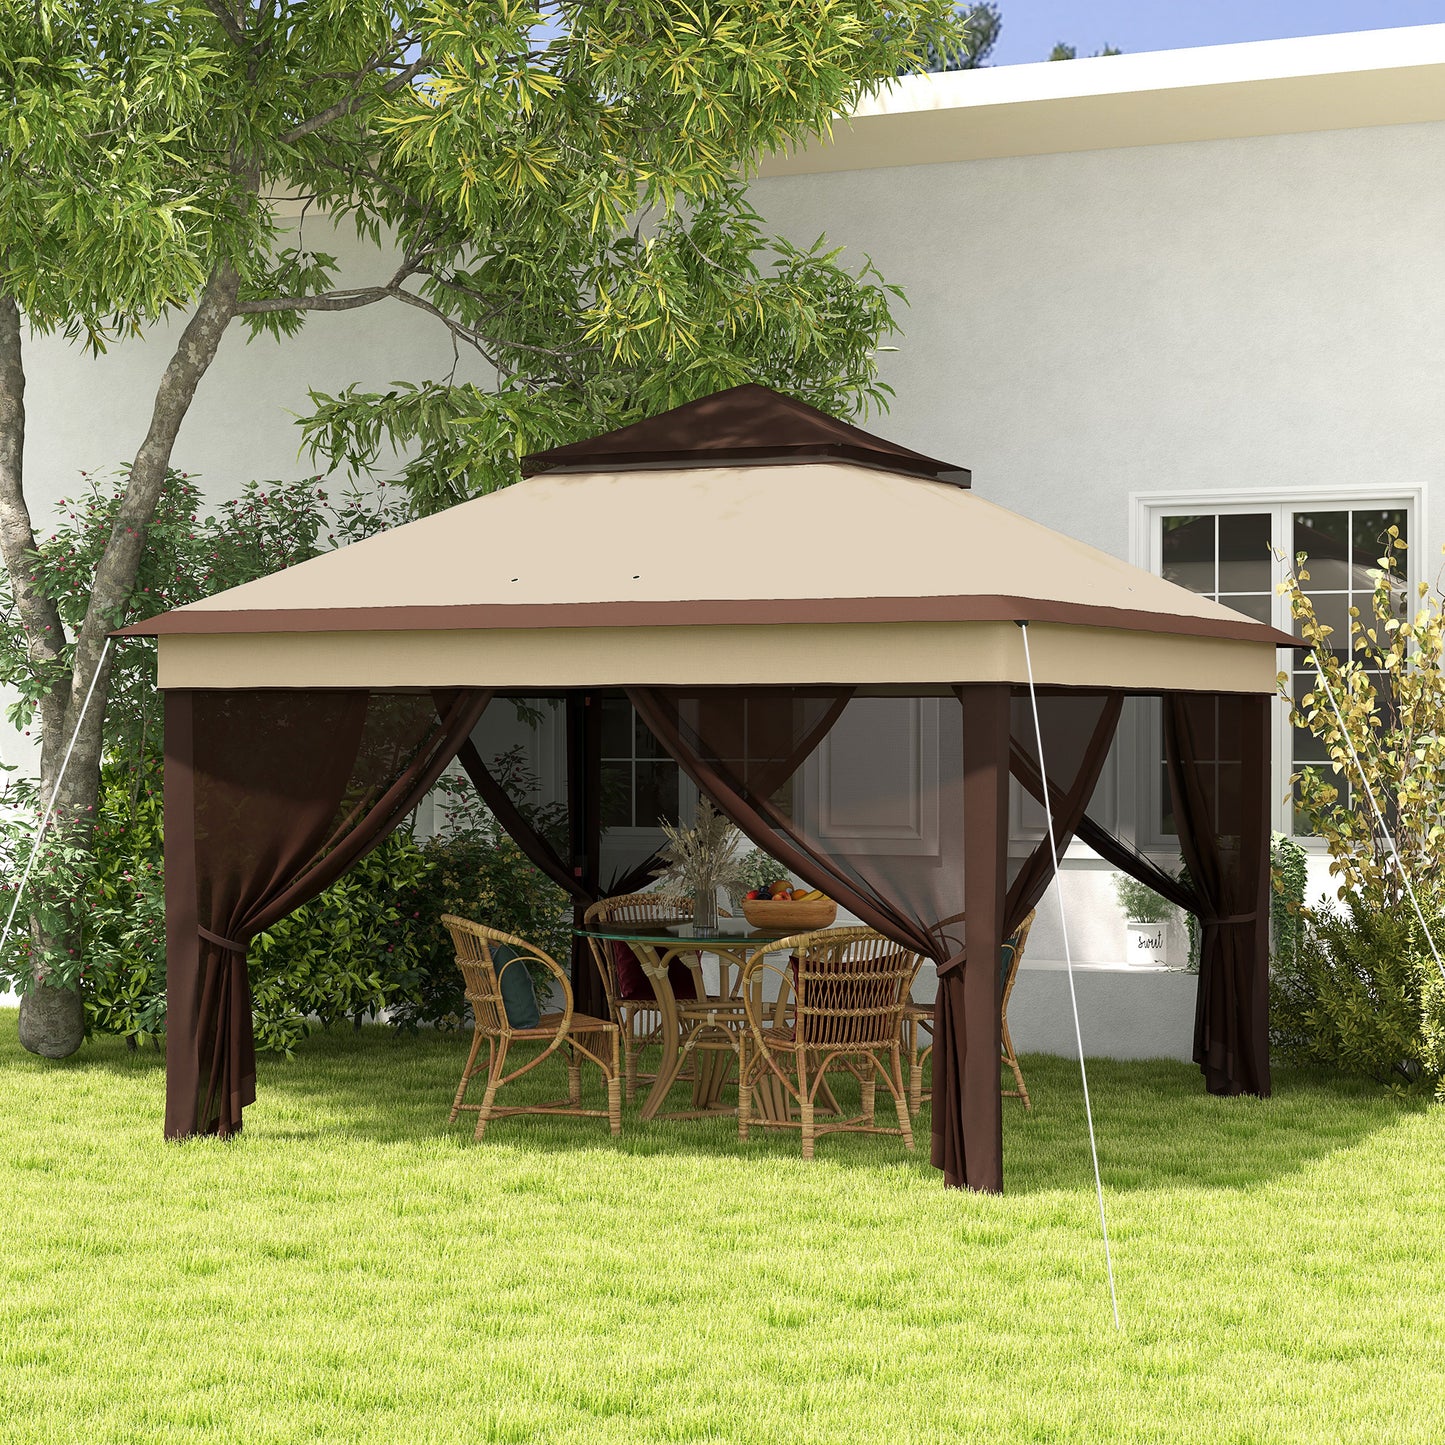 Outsunny Gazebo 3x3 adjustable on 3 levels with removable walls, in steel and Oxford fabric, coffee color and beige